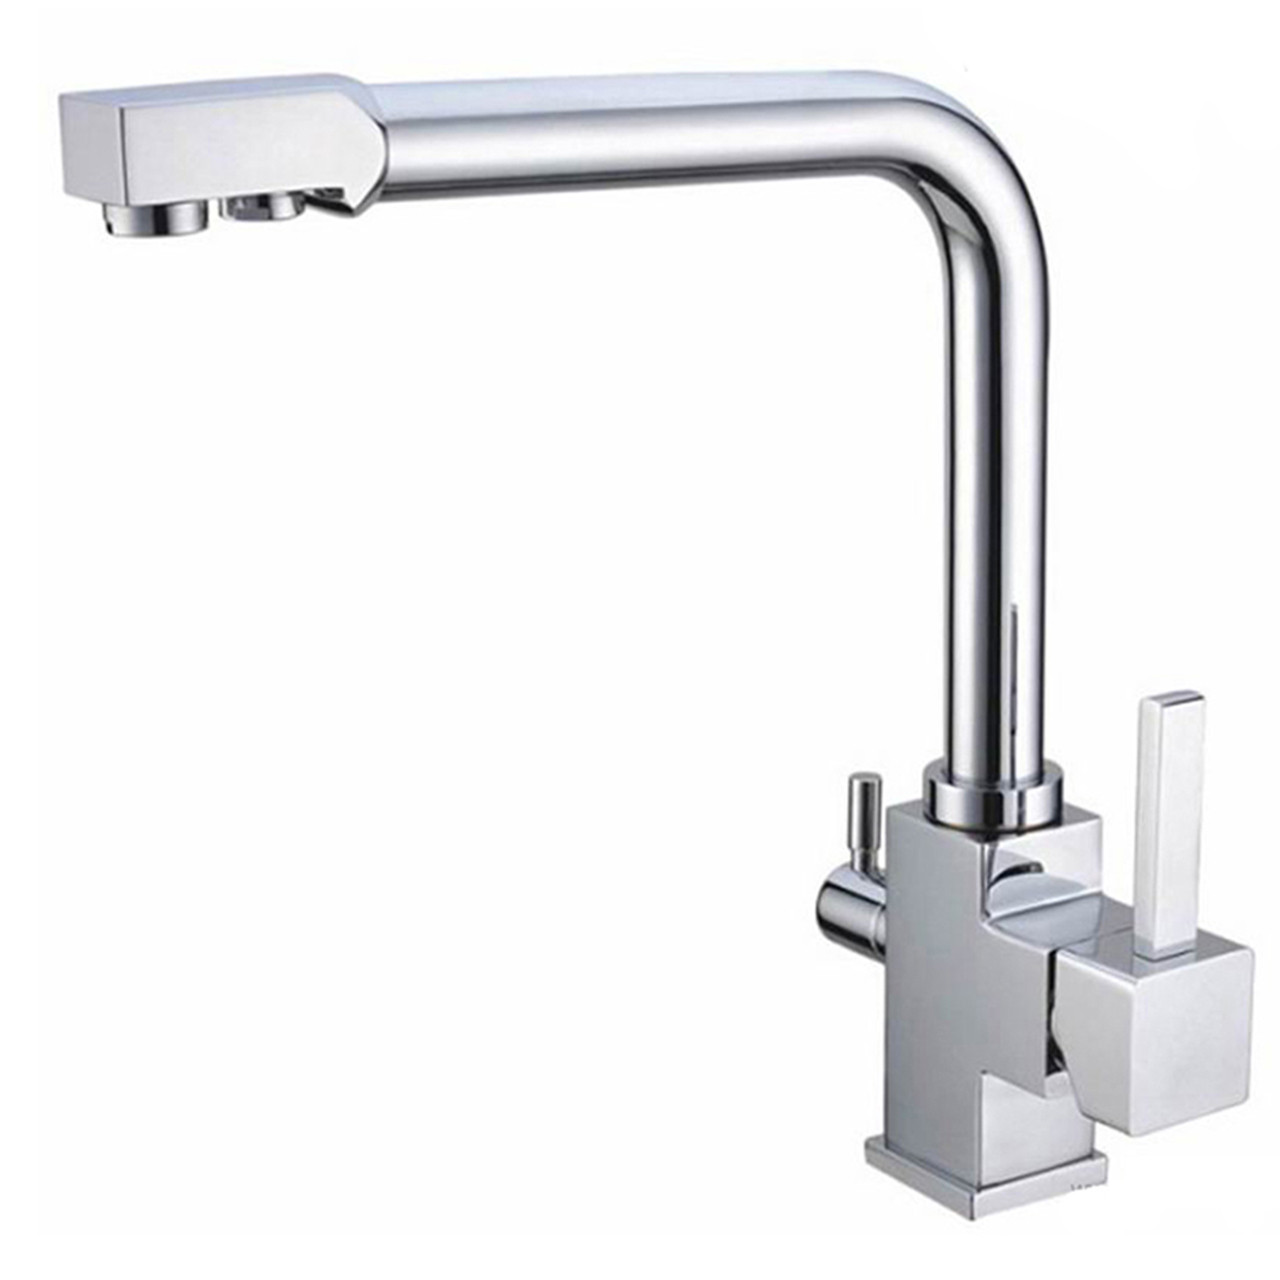 Waterlux Wl 306 N Brushed Nickel Three Way Hot Cold Kitchen Faucet